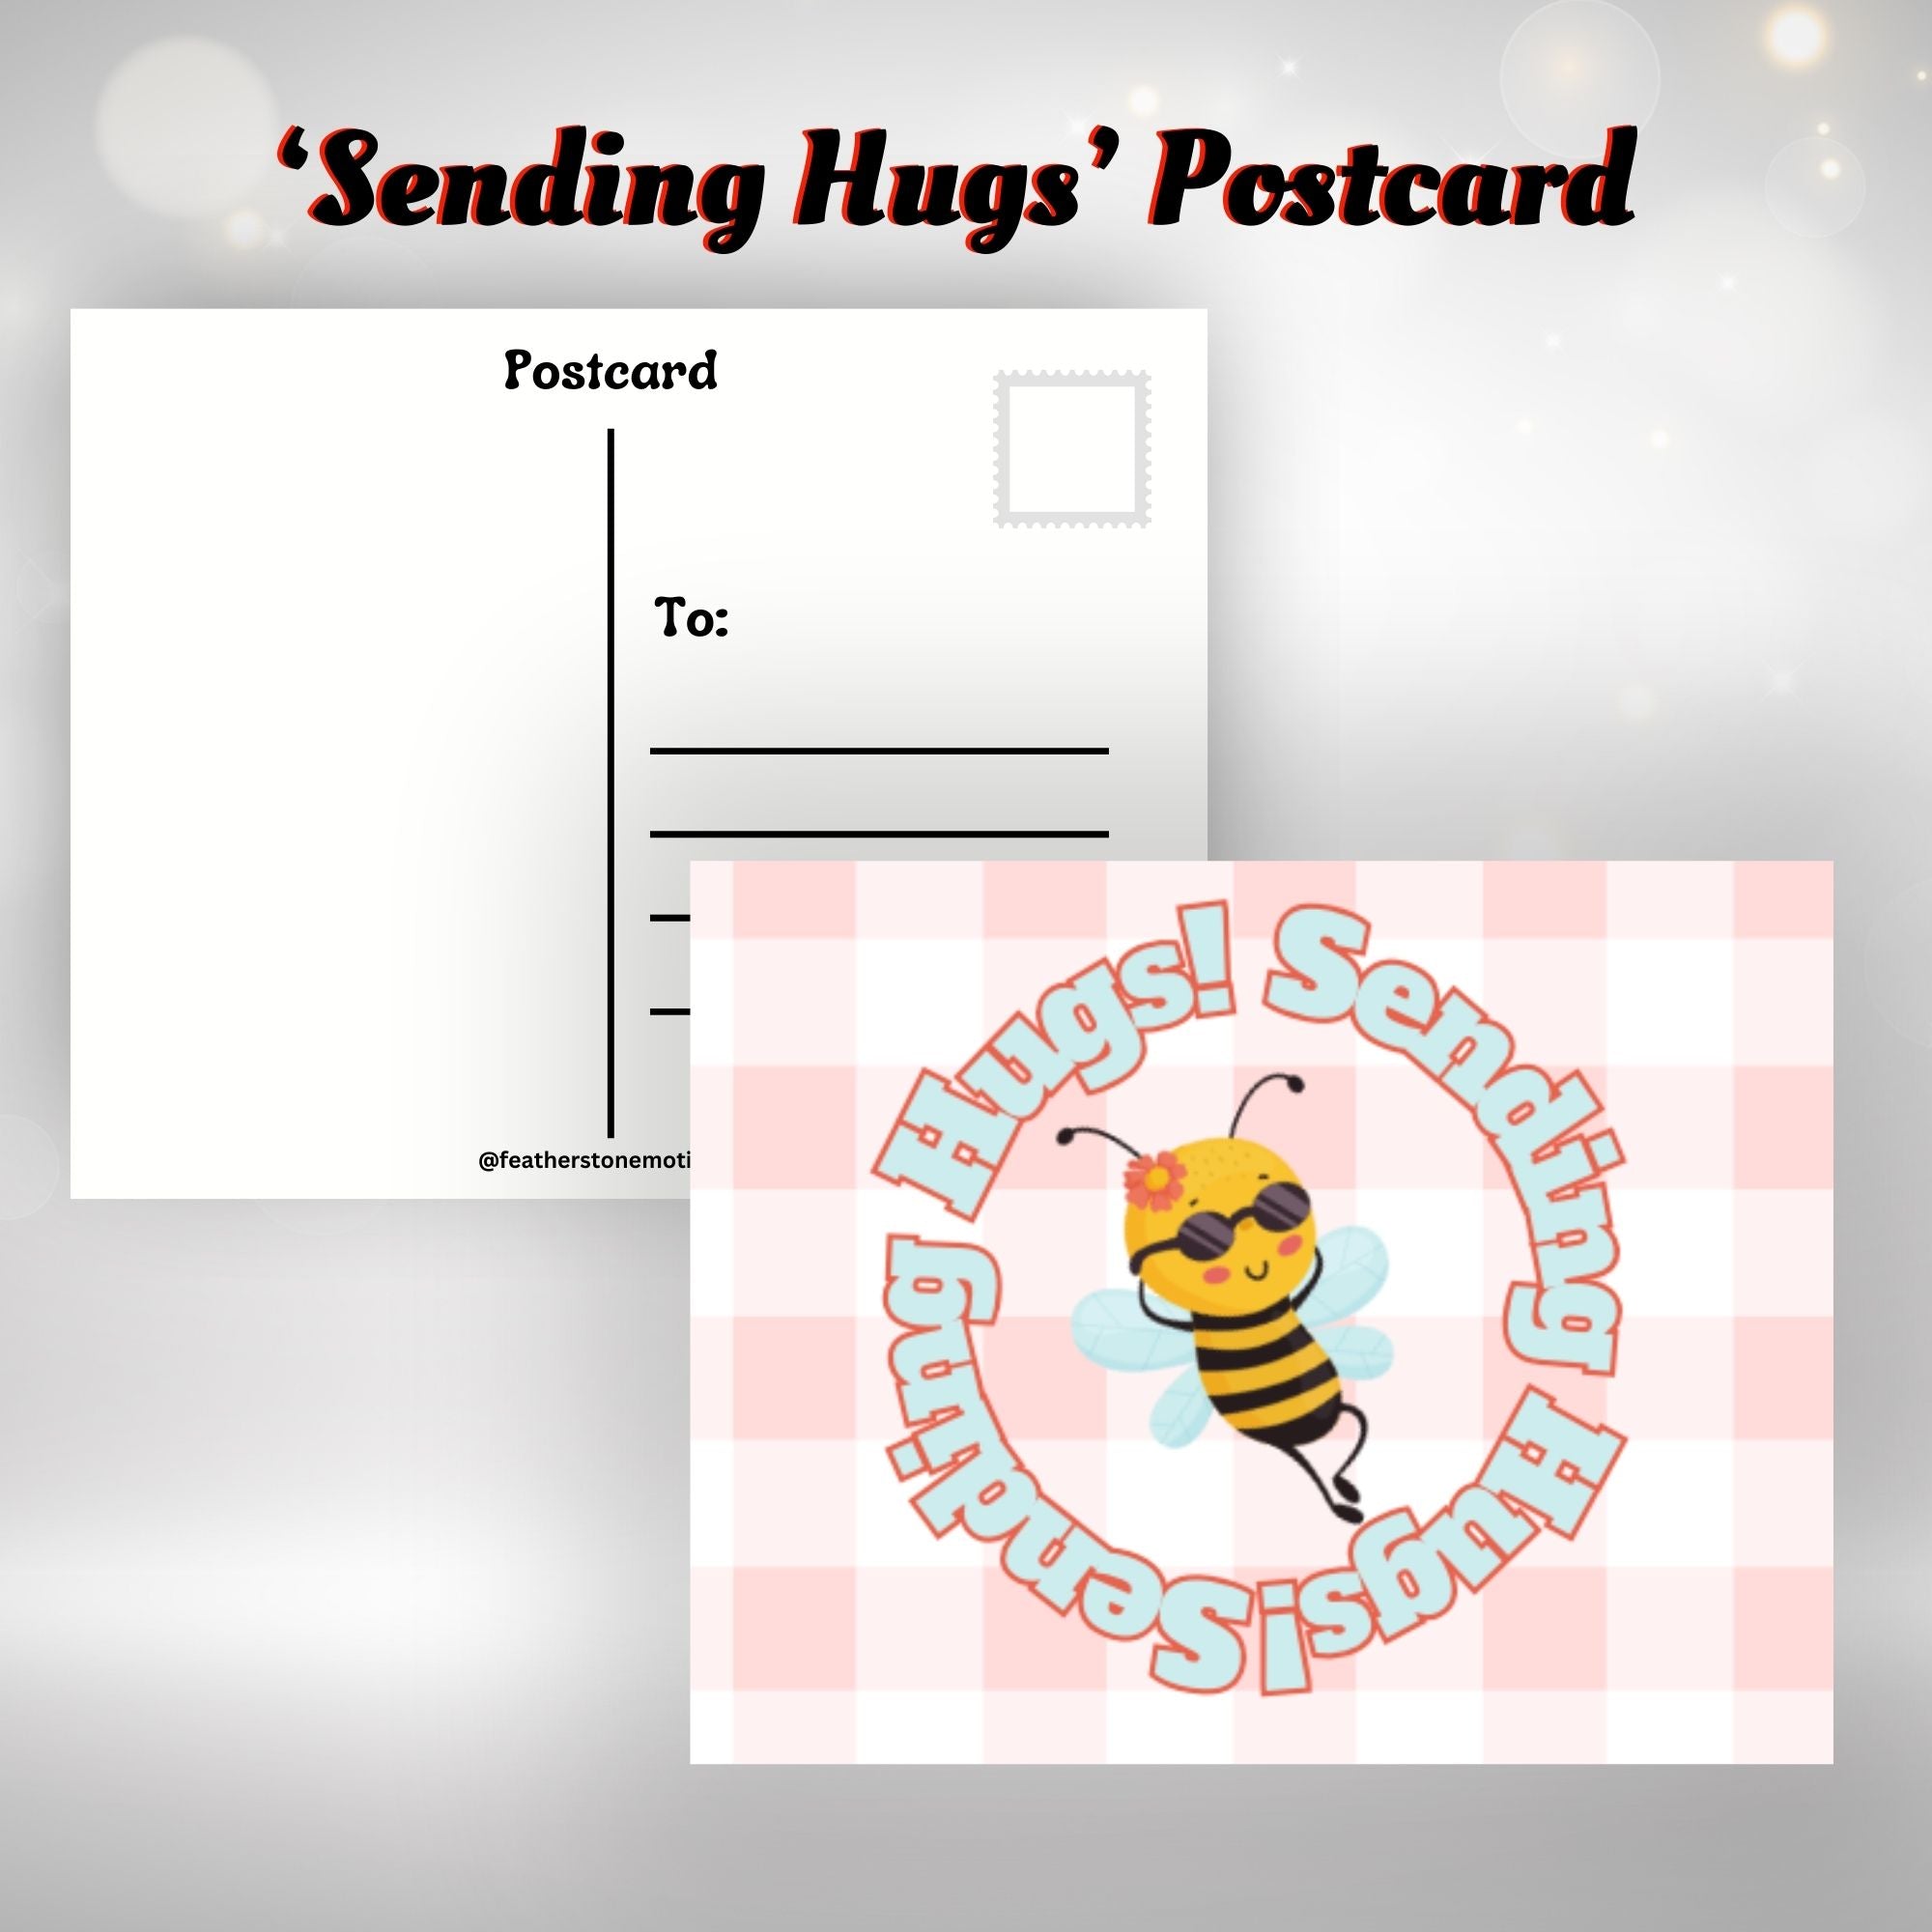 This image shows the Sending Hugs! postcard with a bee wearing sunglasses in the center.